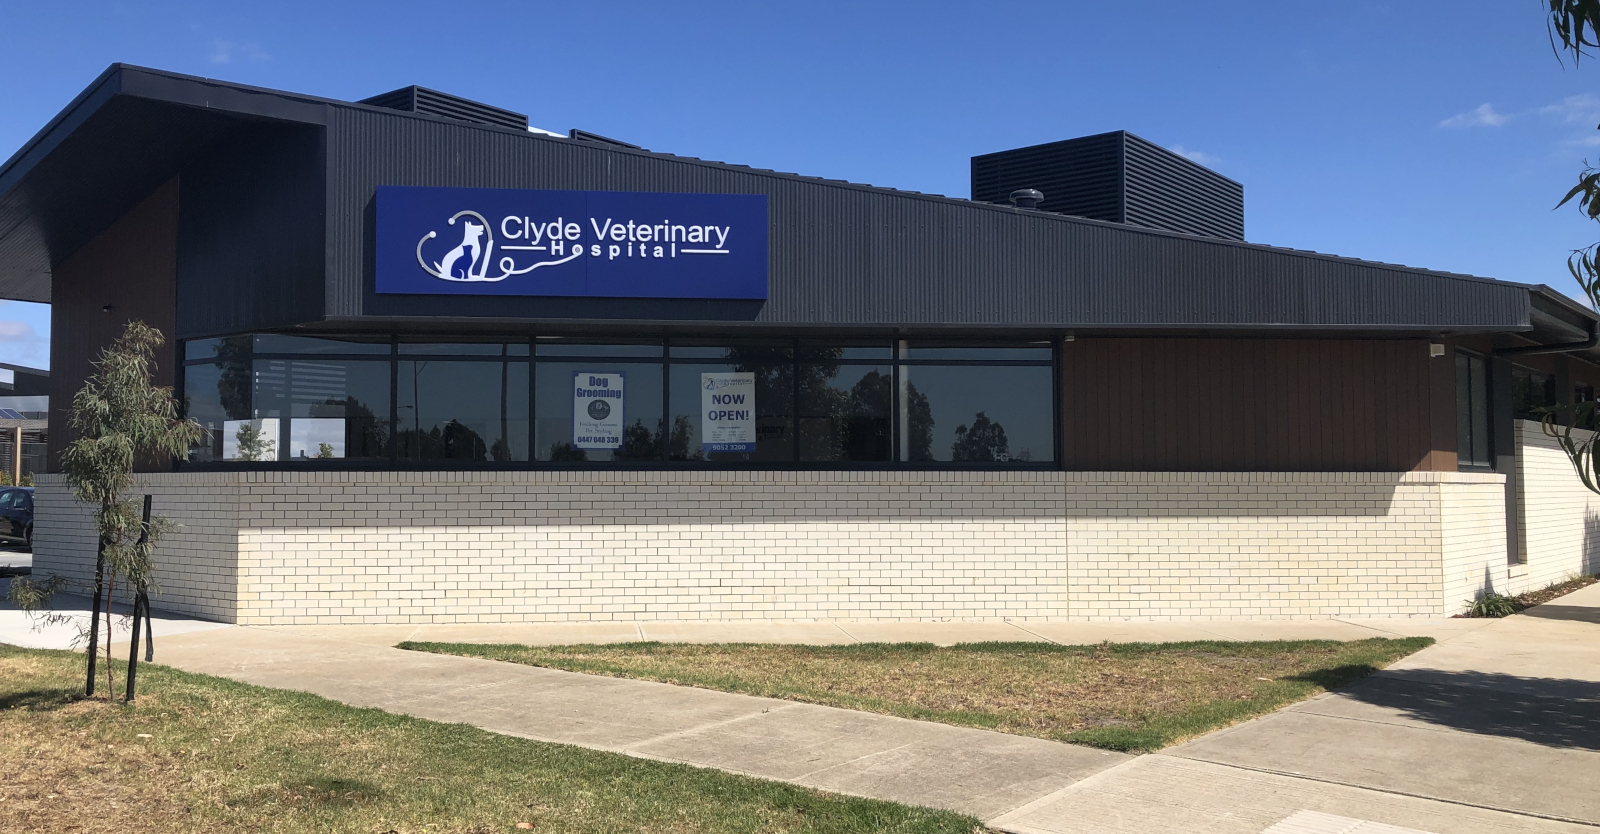 Clyde Veterinary Hospital Introduces The Latest Technology and Materials To Provide Pet With A Variety Of Veterinary Care And Services